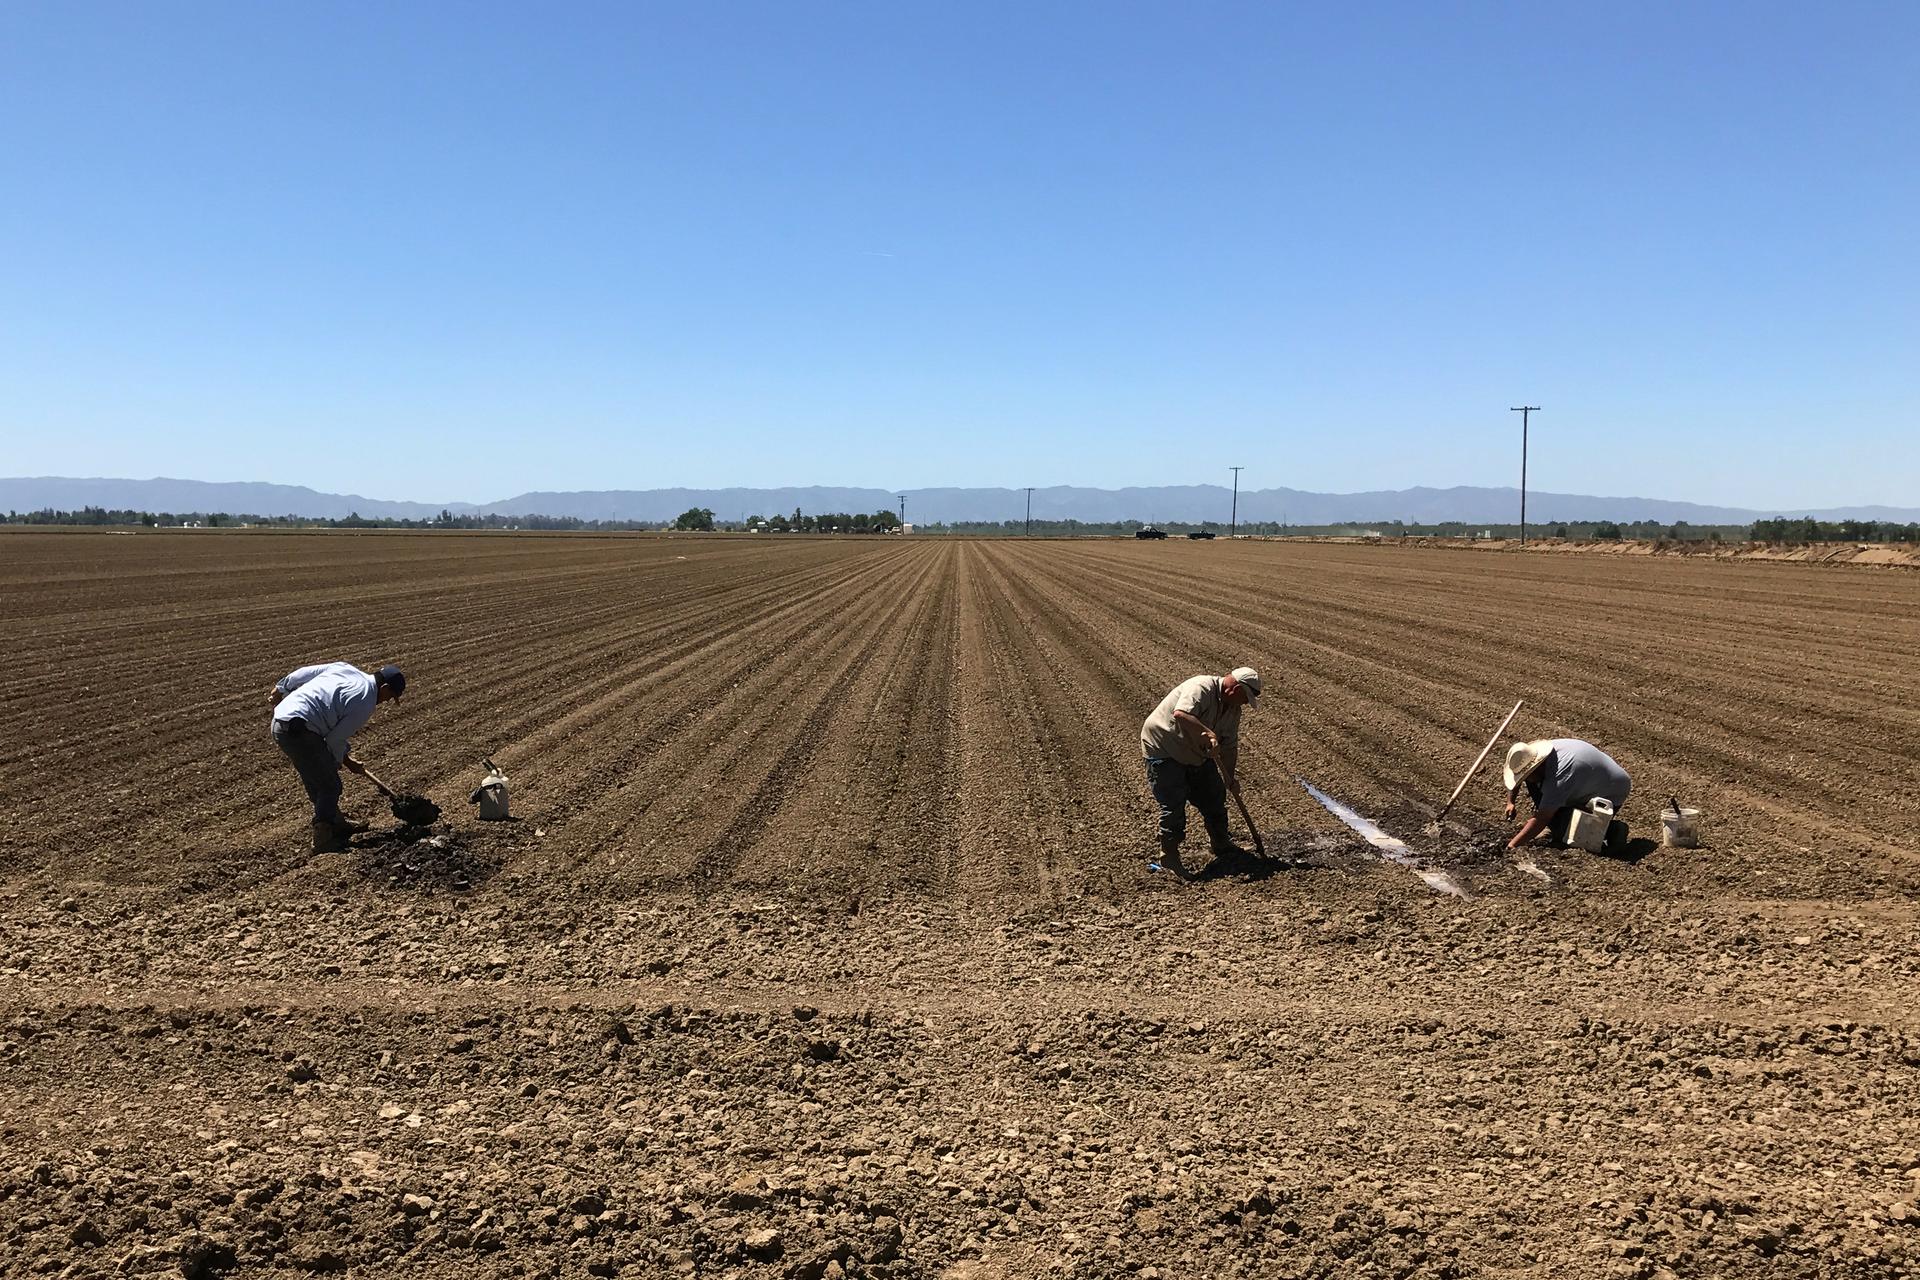 Farm workers repair irrigation pipes during spring planting